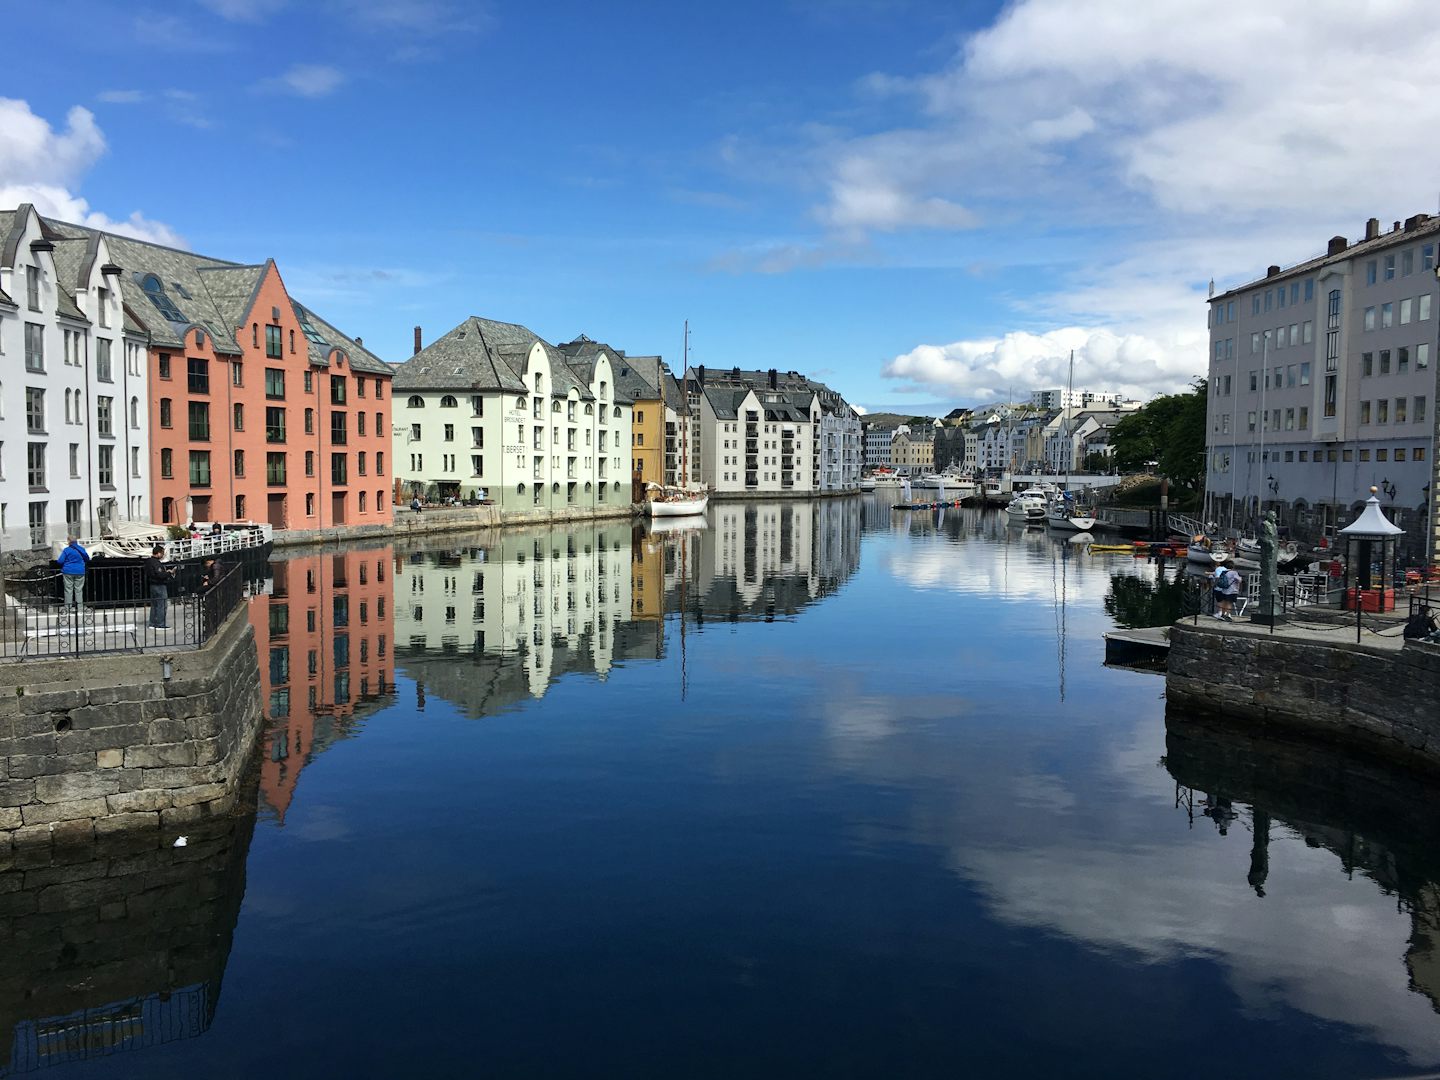 Alesund is known as the "Cutest City in Norway"